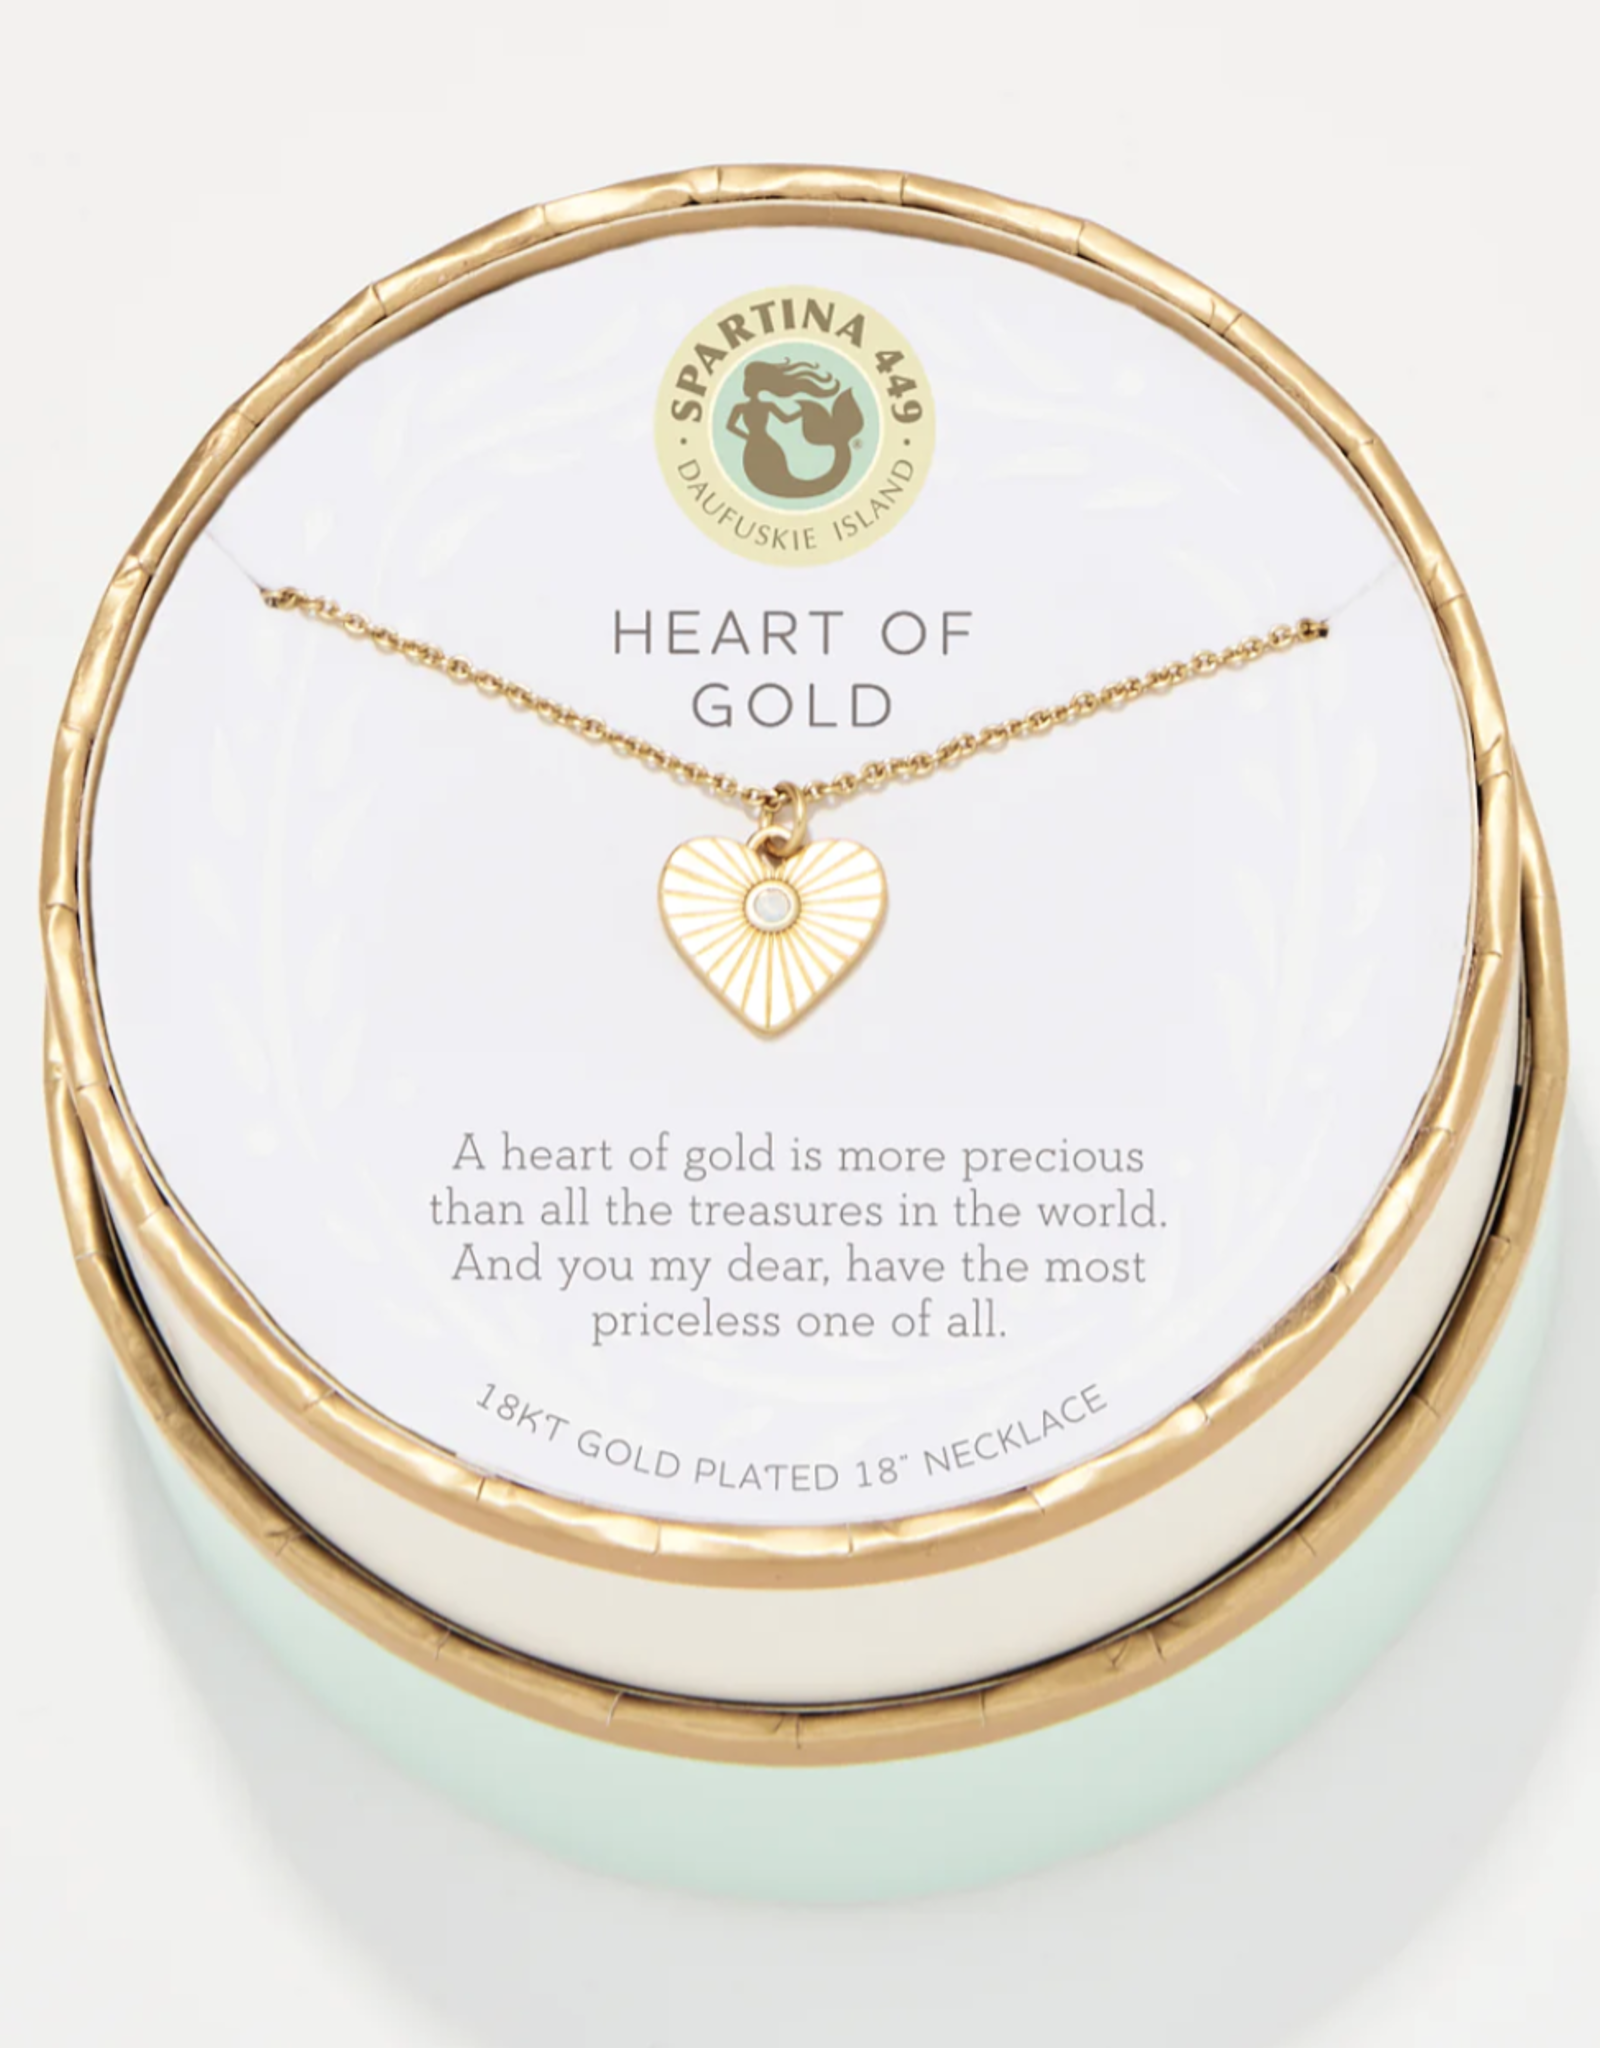 Spartina Heart of Gold Necklace